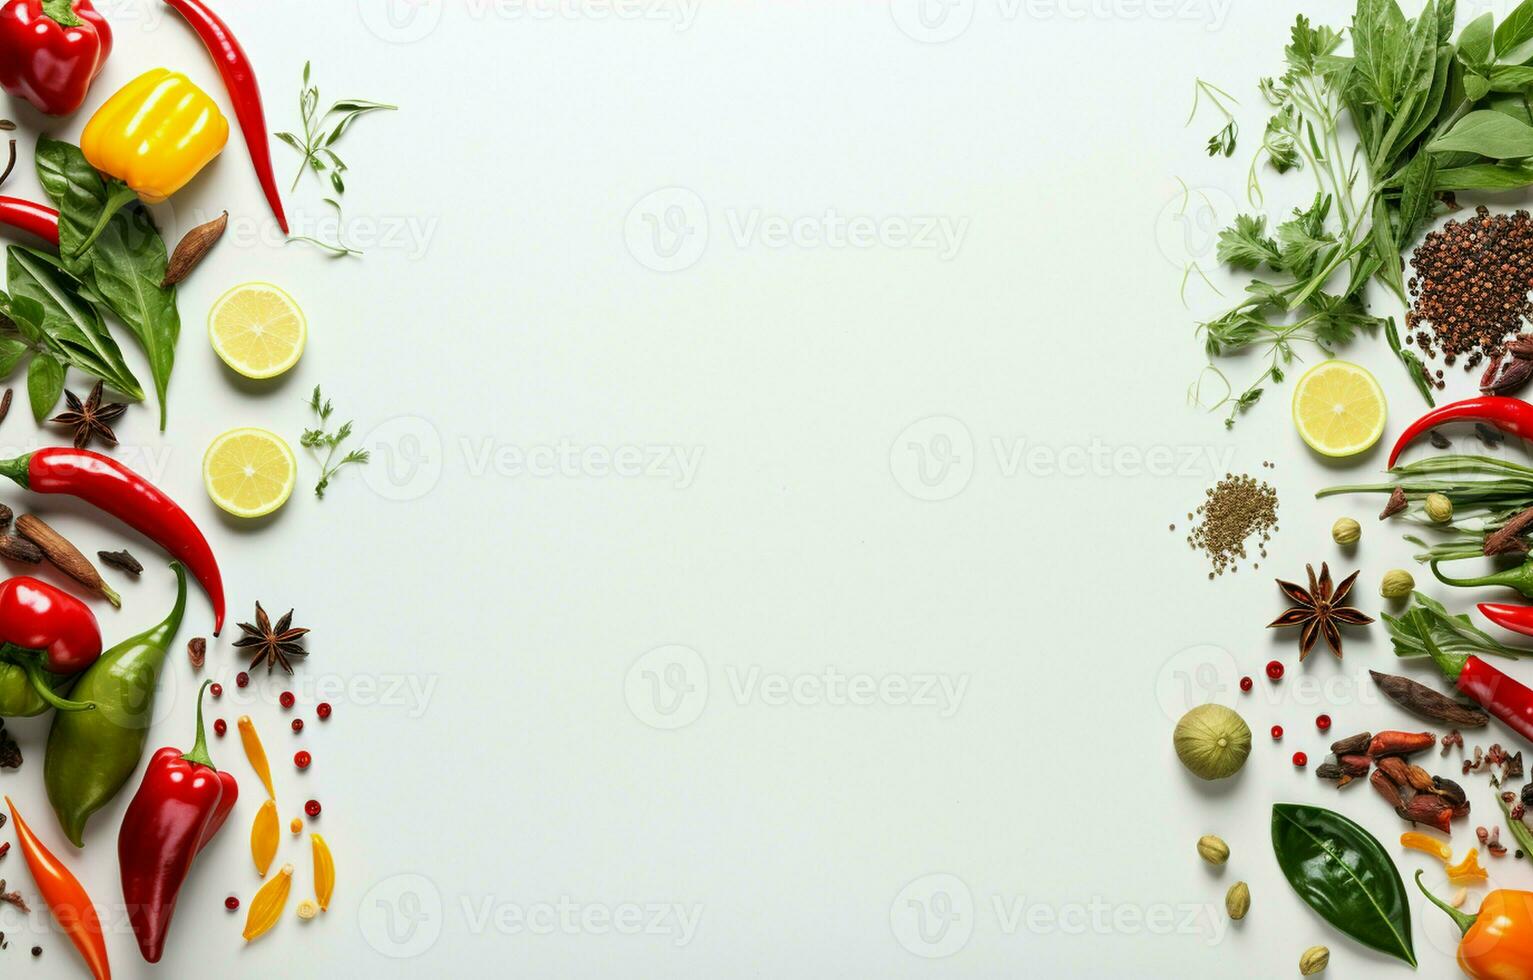 Flying set of colorful spices peppers, chili, garlic, laurel leaf, and herbs in the air isolated on a white background. top view, with copy space. photo